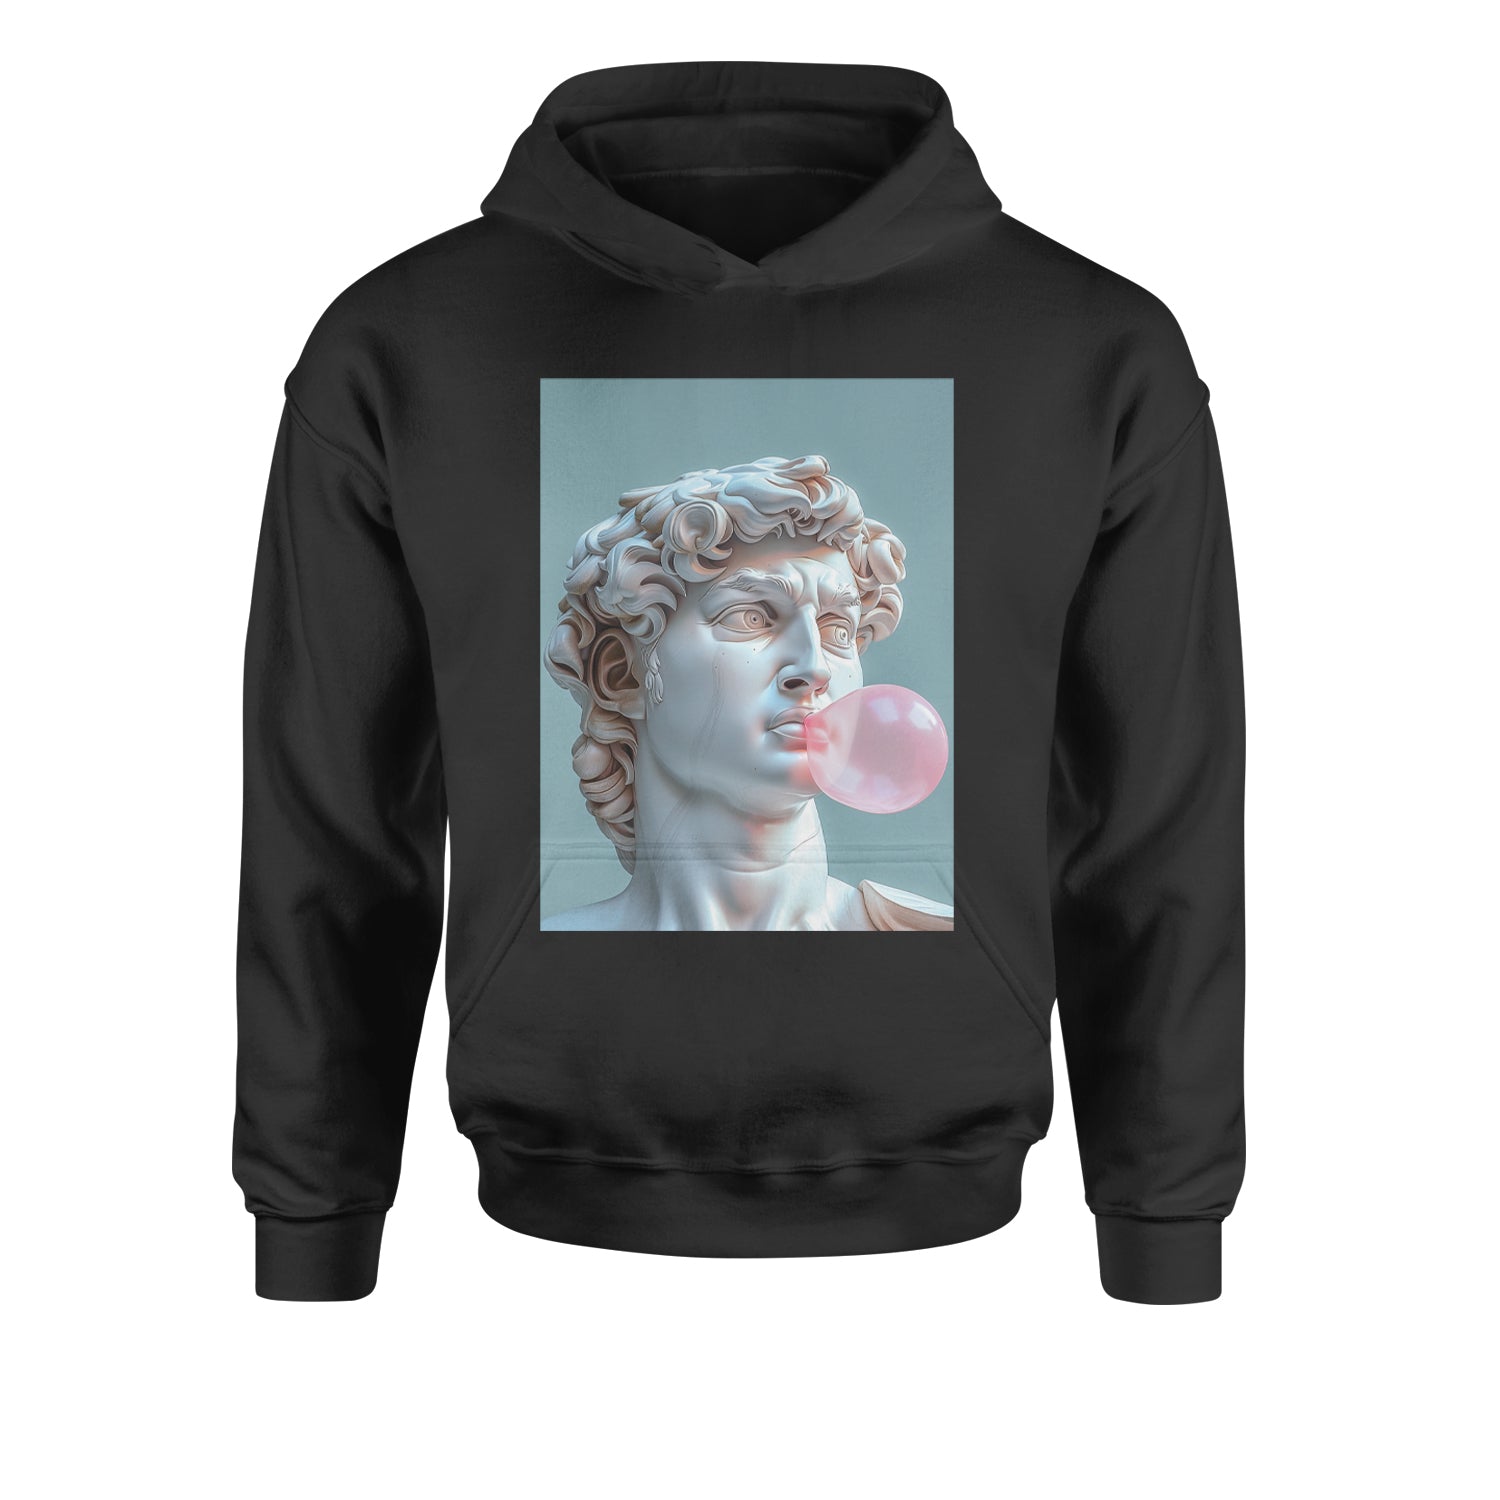 Michelangelo's David with Bubble Gum Contemporary Statue Art Youth-Sized Hoodie Black